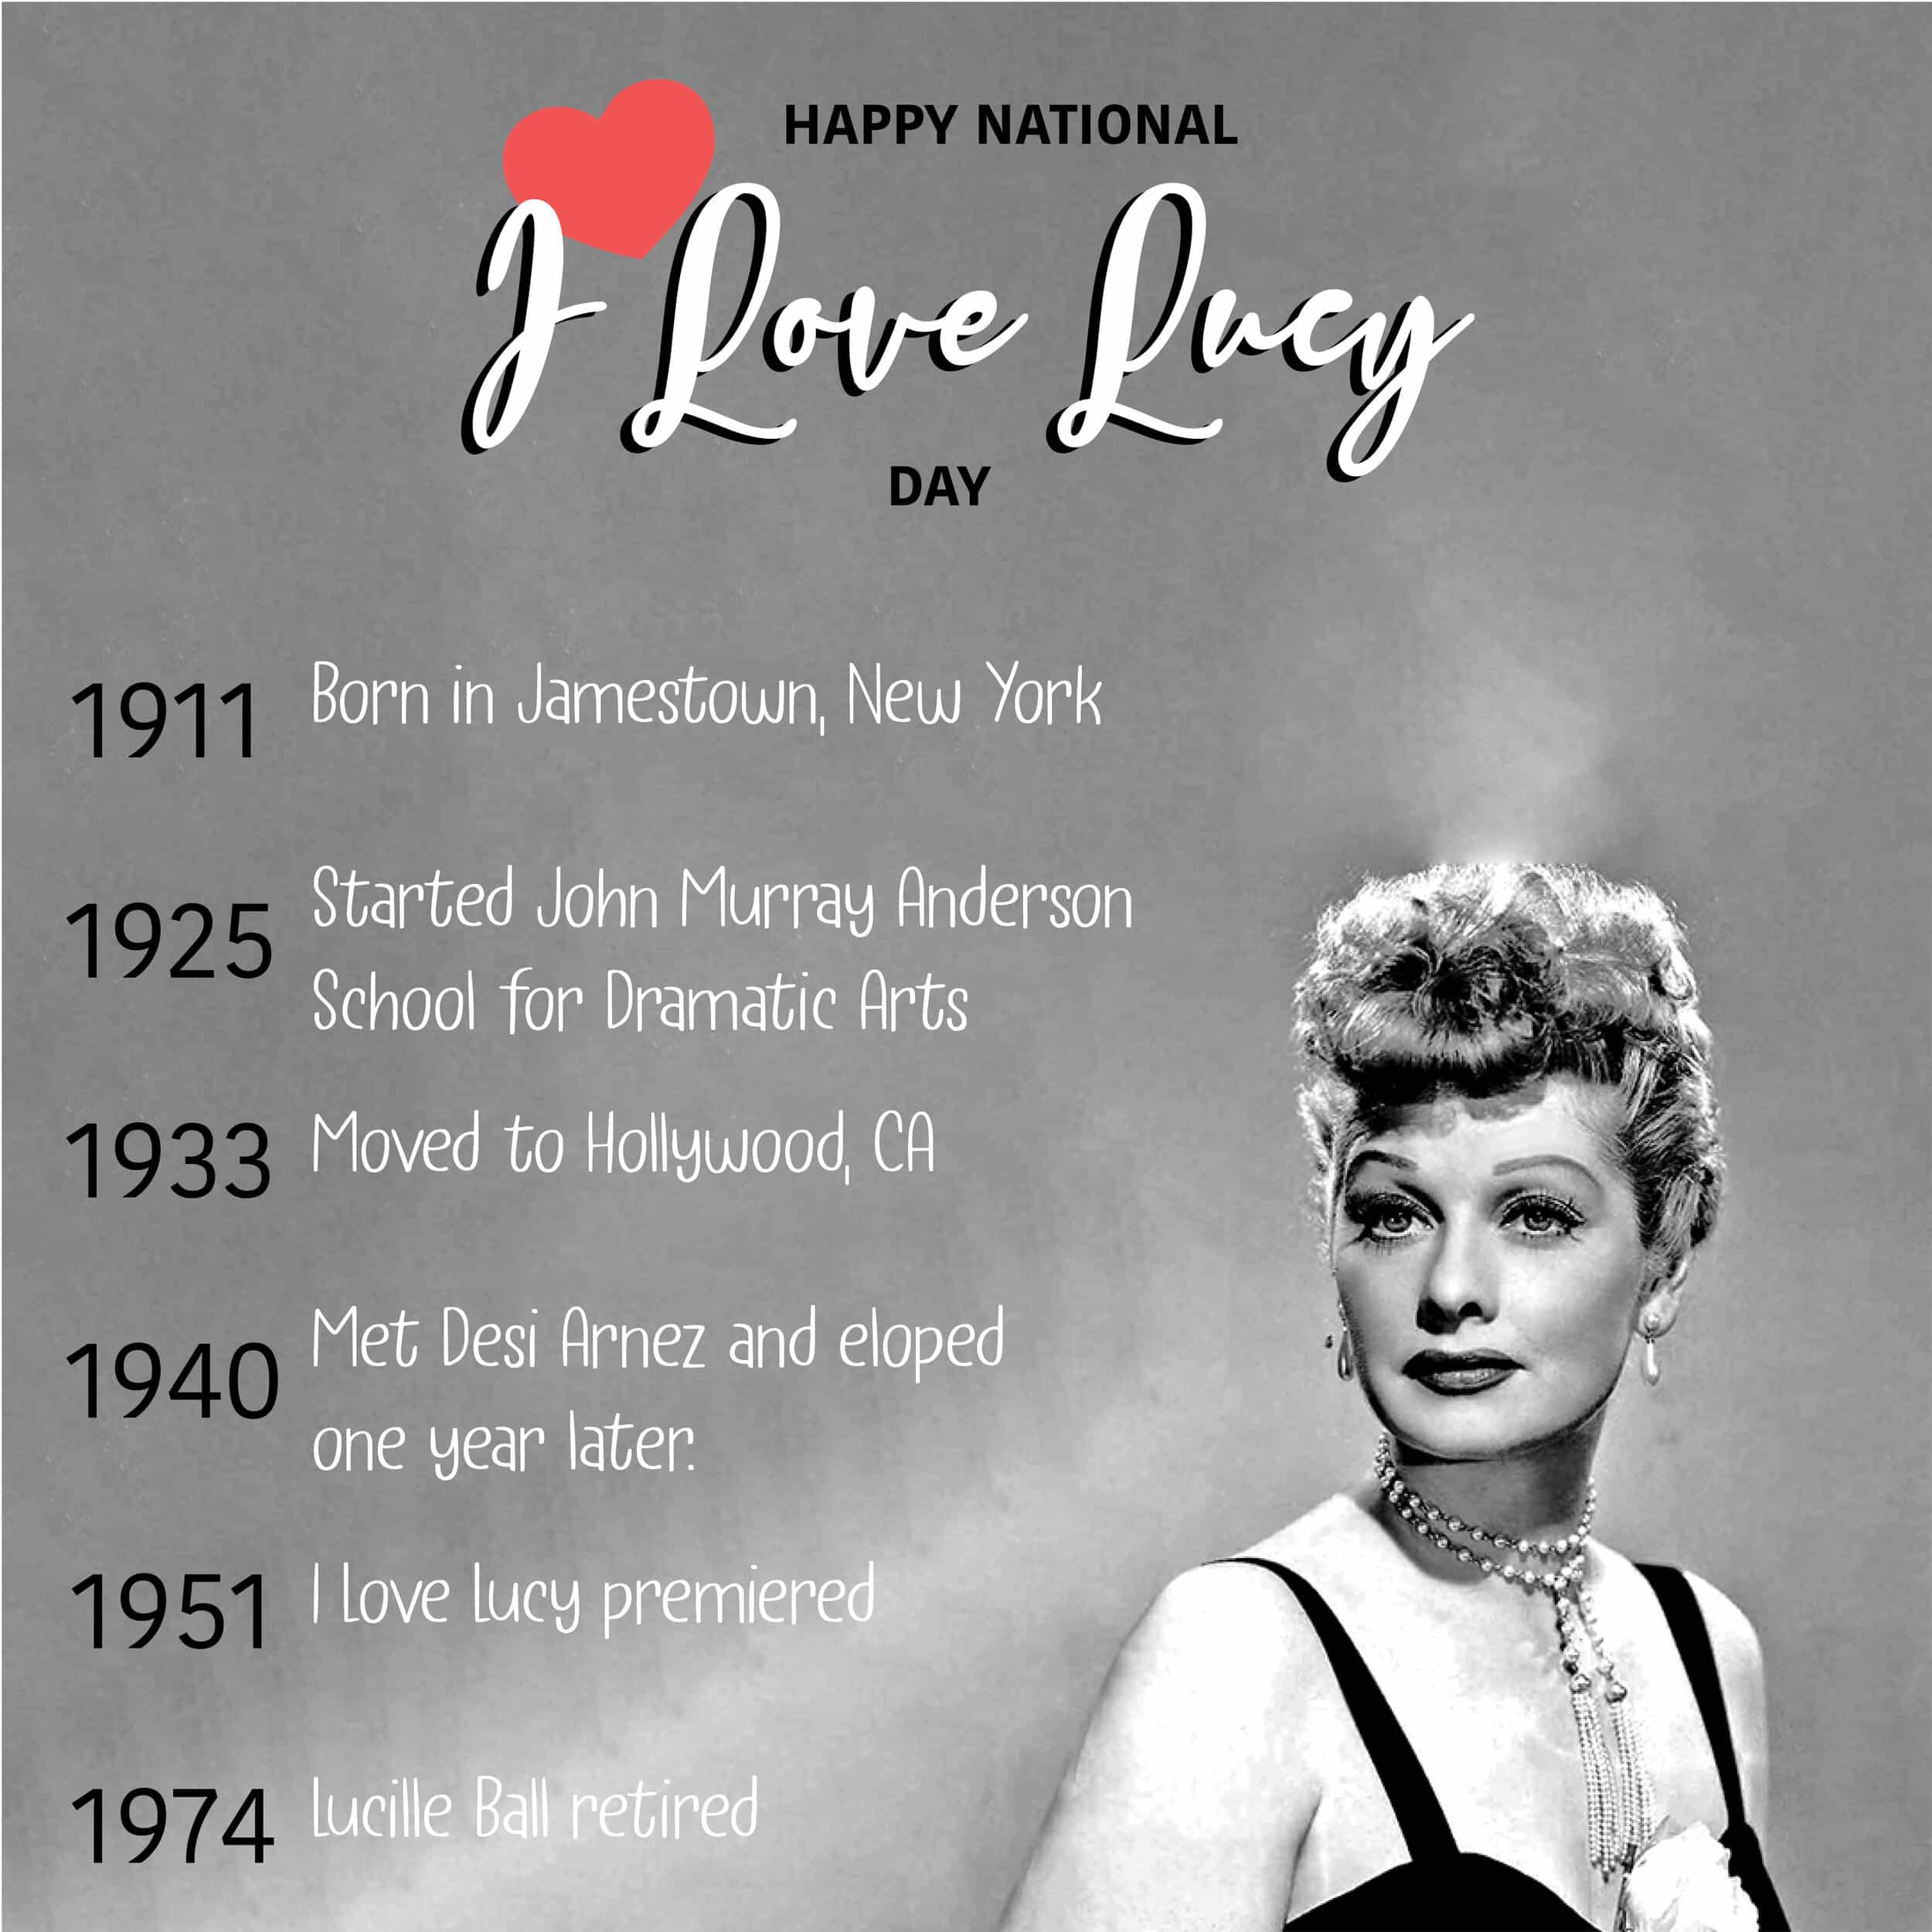 We celebrate National I Love Lucy Day on Oct. 15th, 2019. Lucille Ball was an American actress, producer, comedian and so much more.